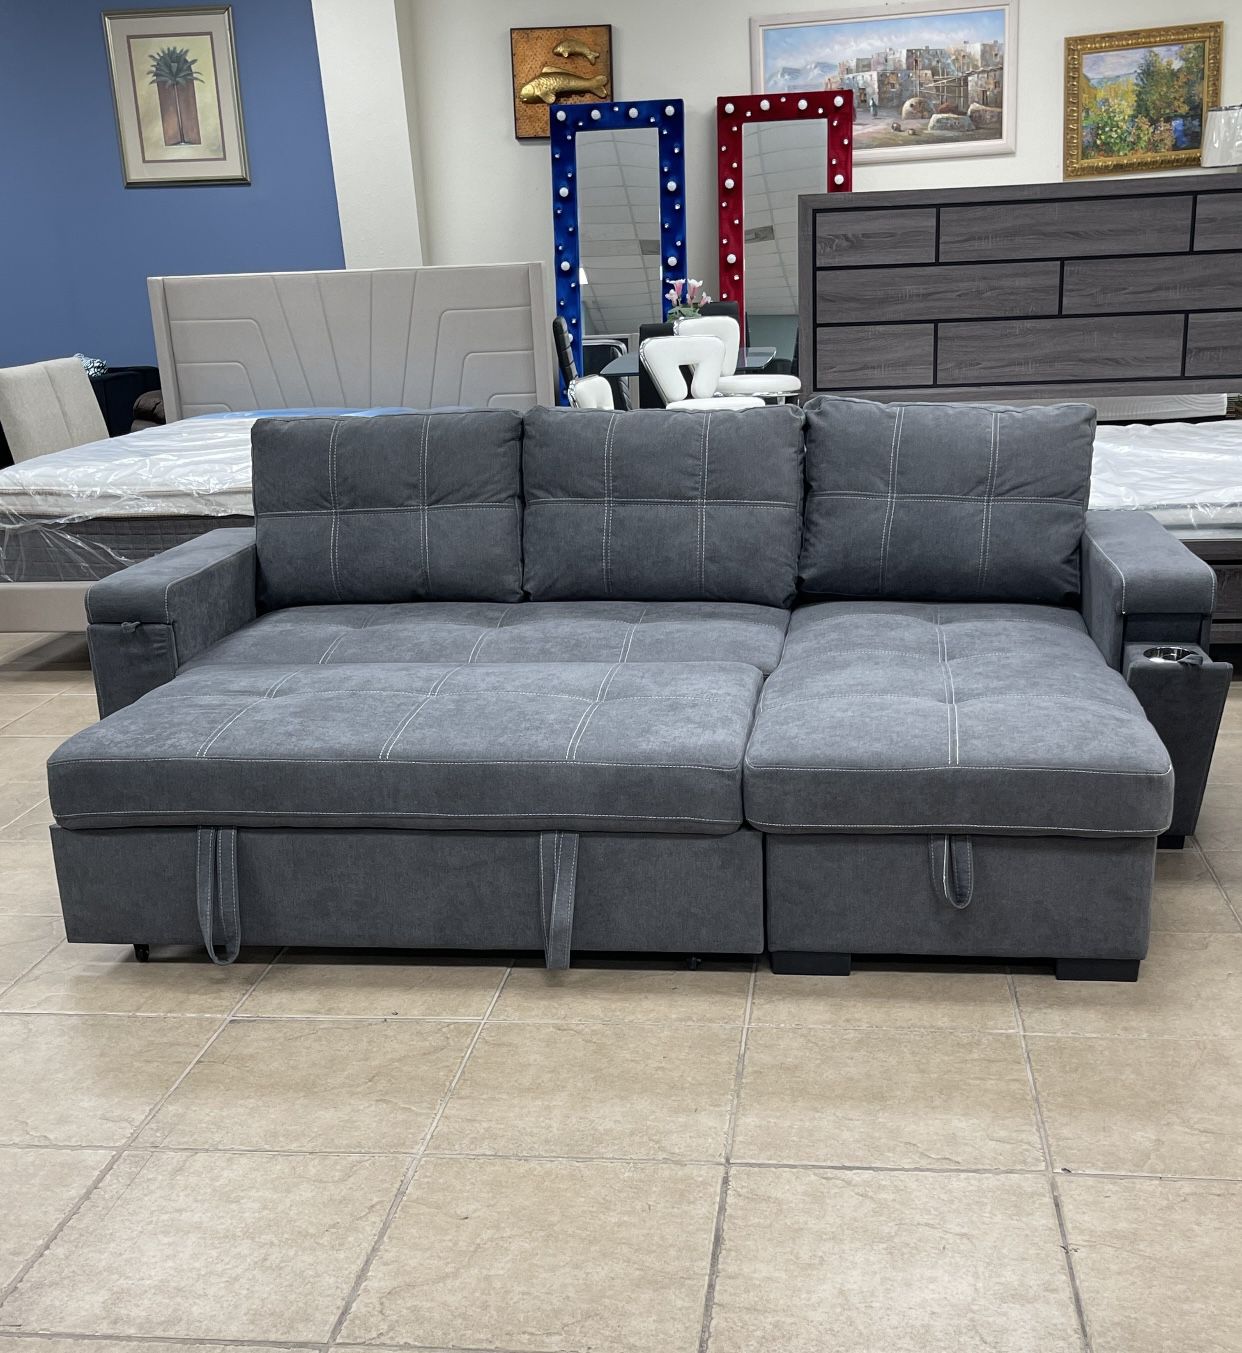 New Gray Sectional Sofa Couch Sleeper 